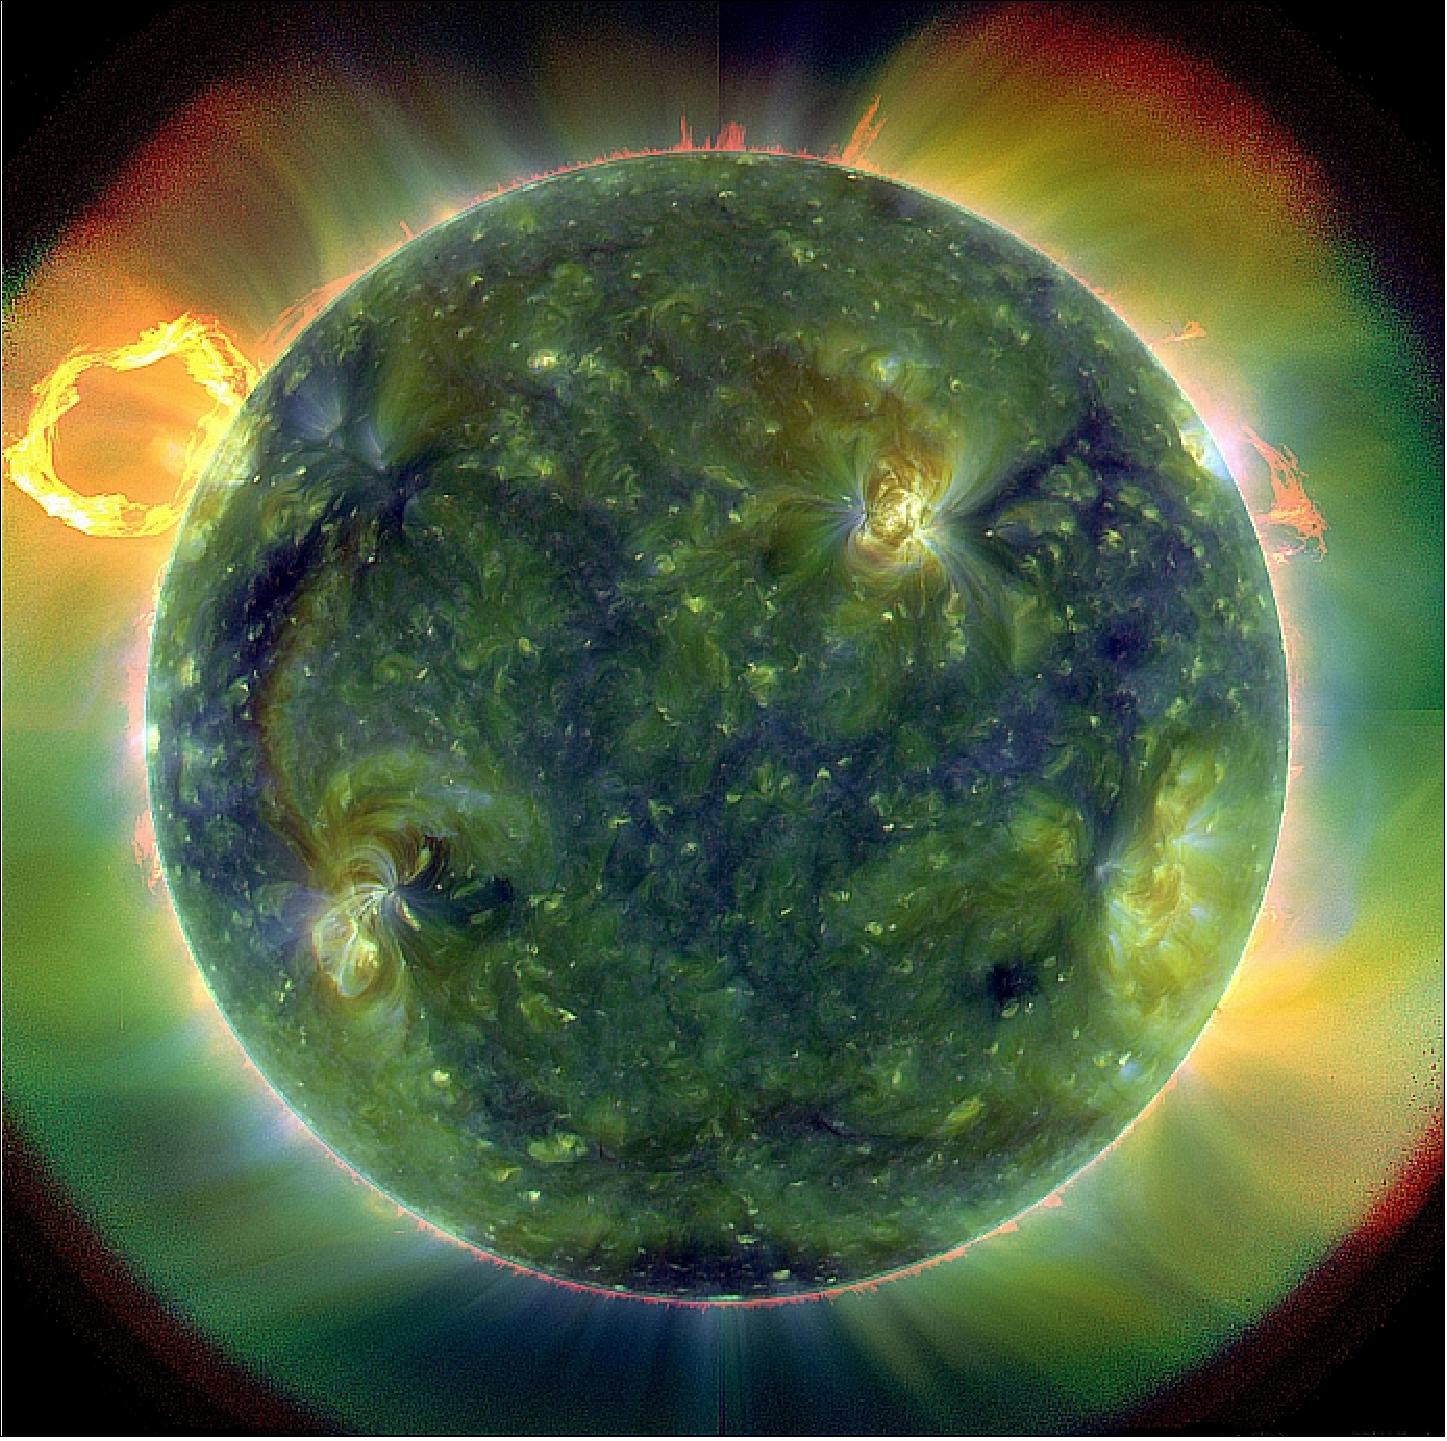 Figure 38: A full-disk multiwavelength extreme ultraviolet image of the sun taken by the AIA instrument on March 30, 2010 (image credit: NASA)